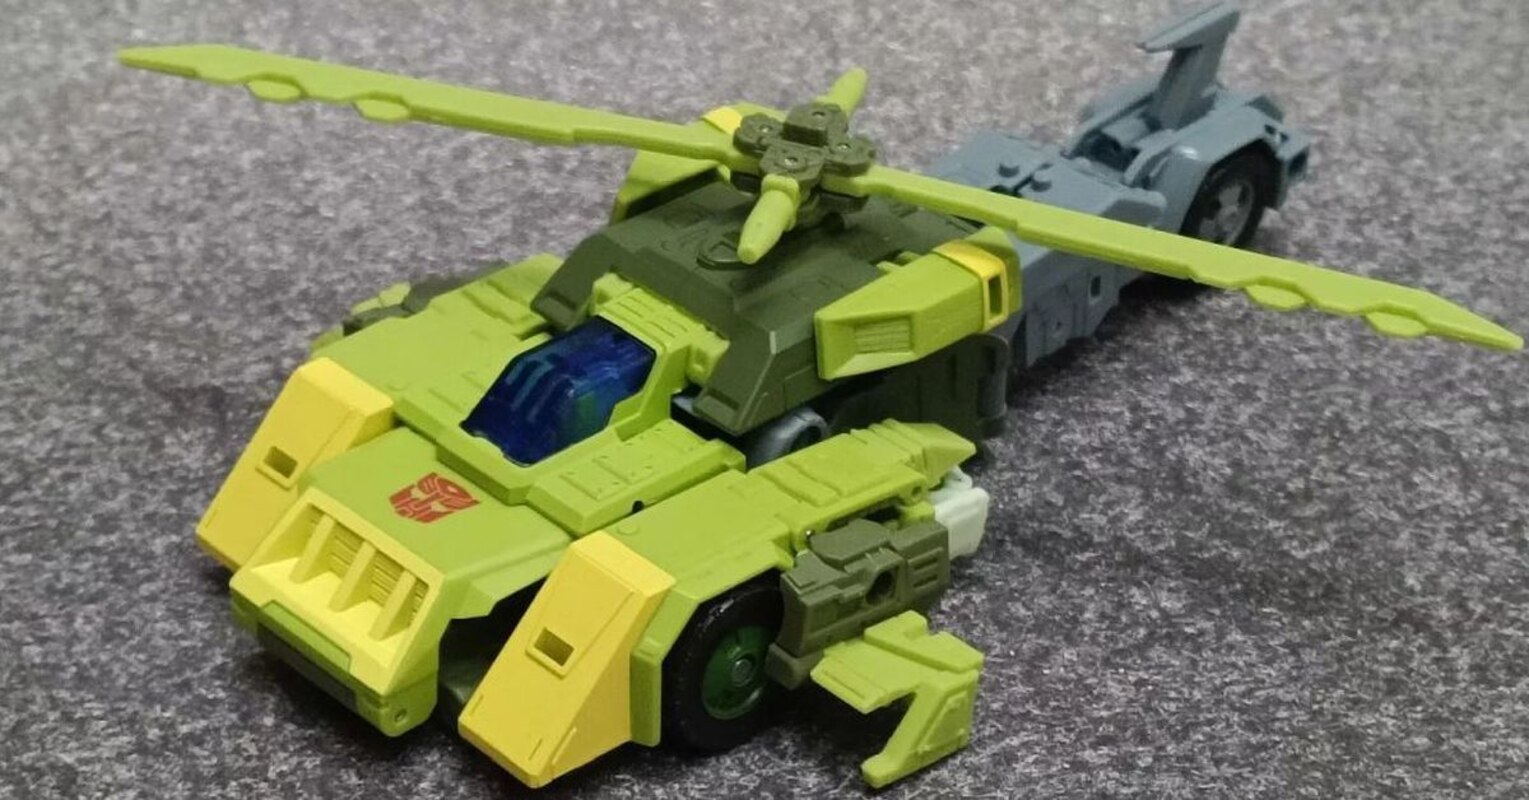 86 Leader Class Springer More In-Hand Images of Transformers Studio Series Figure